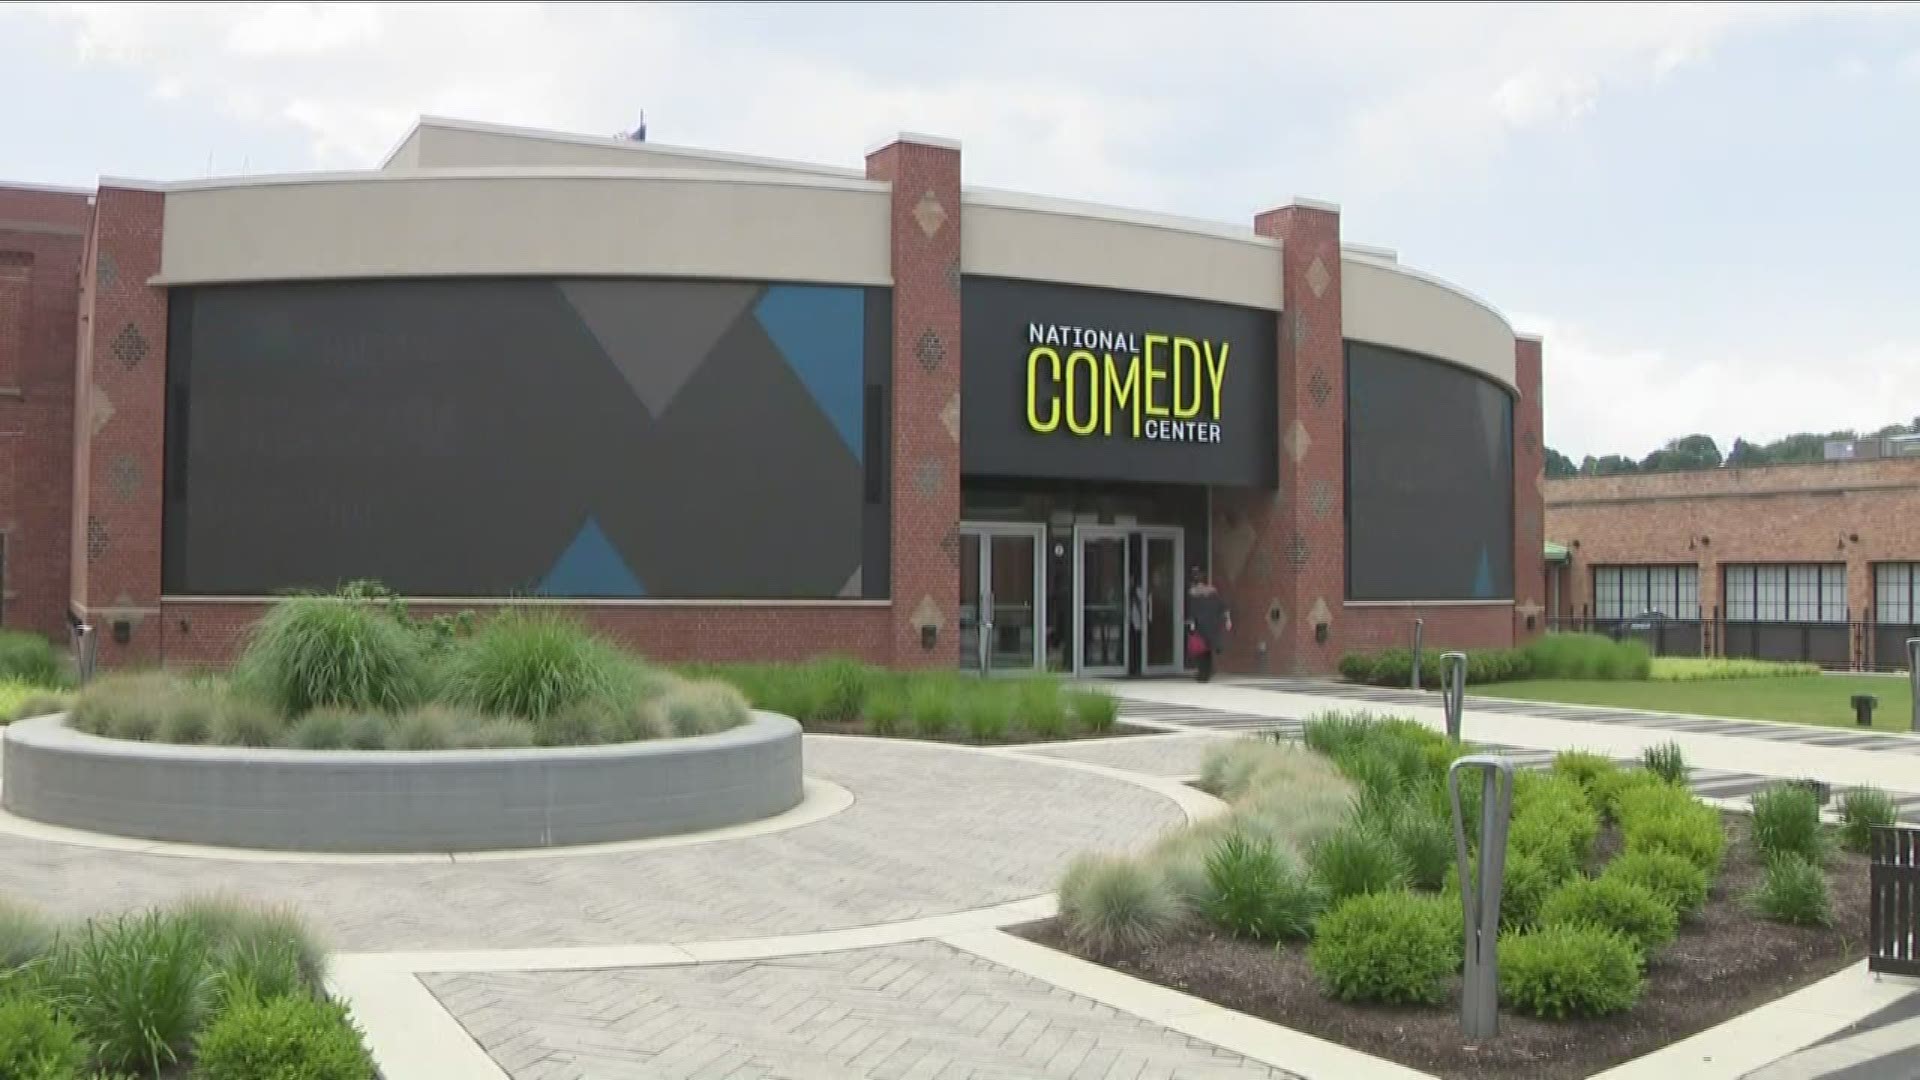 National Comedy Center leads voting for best museum